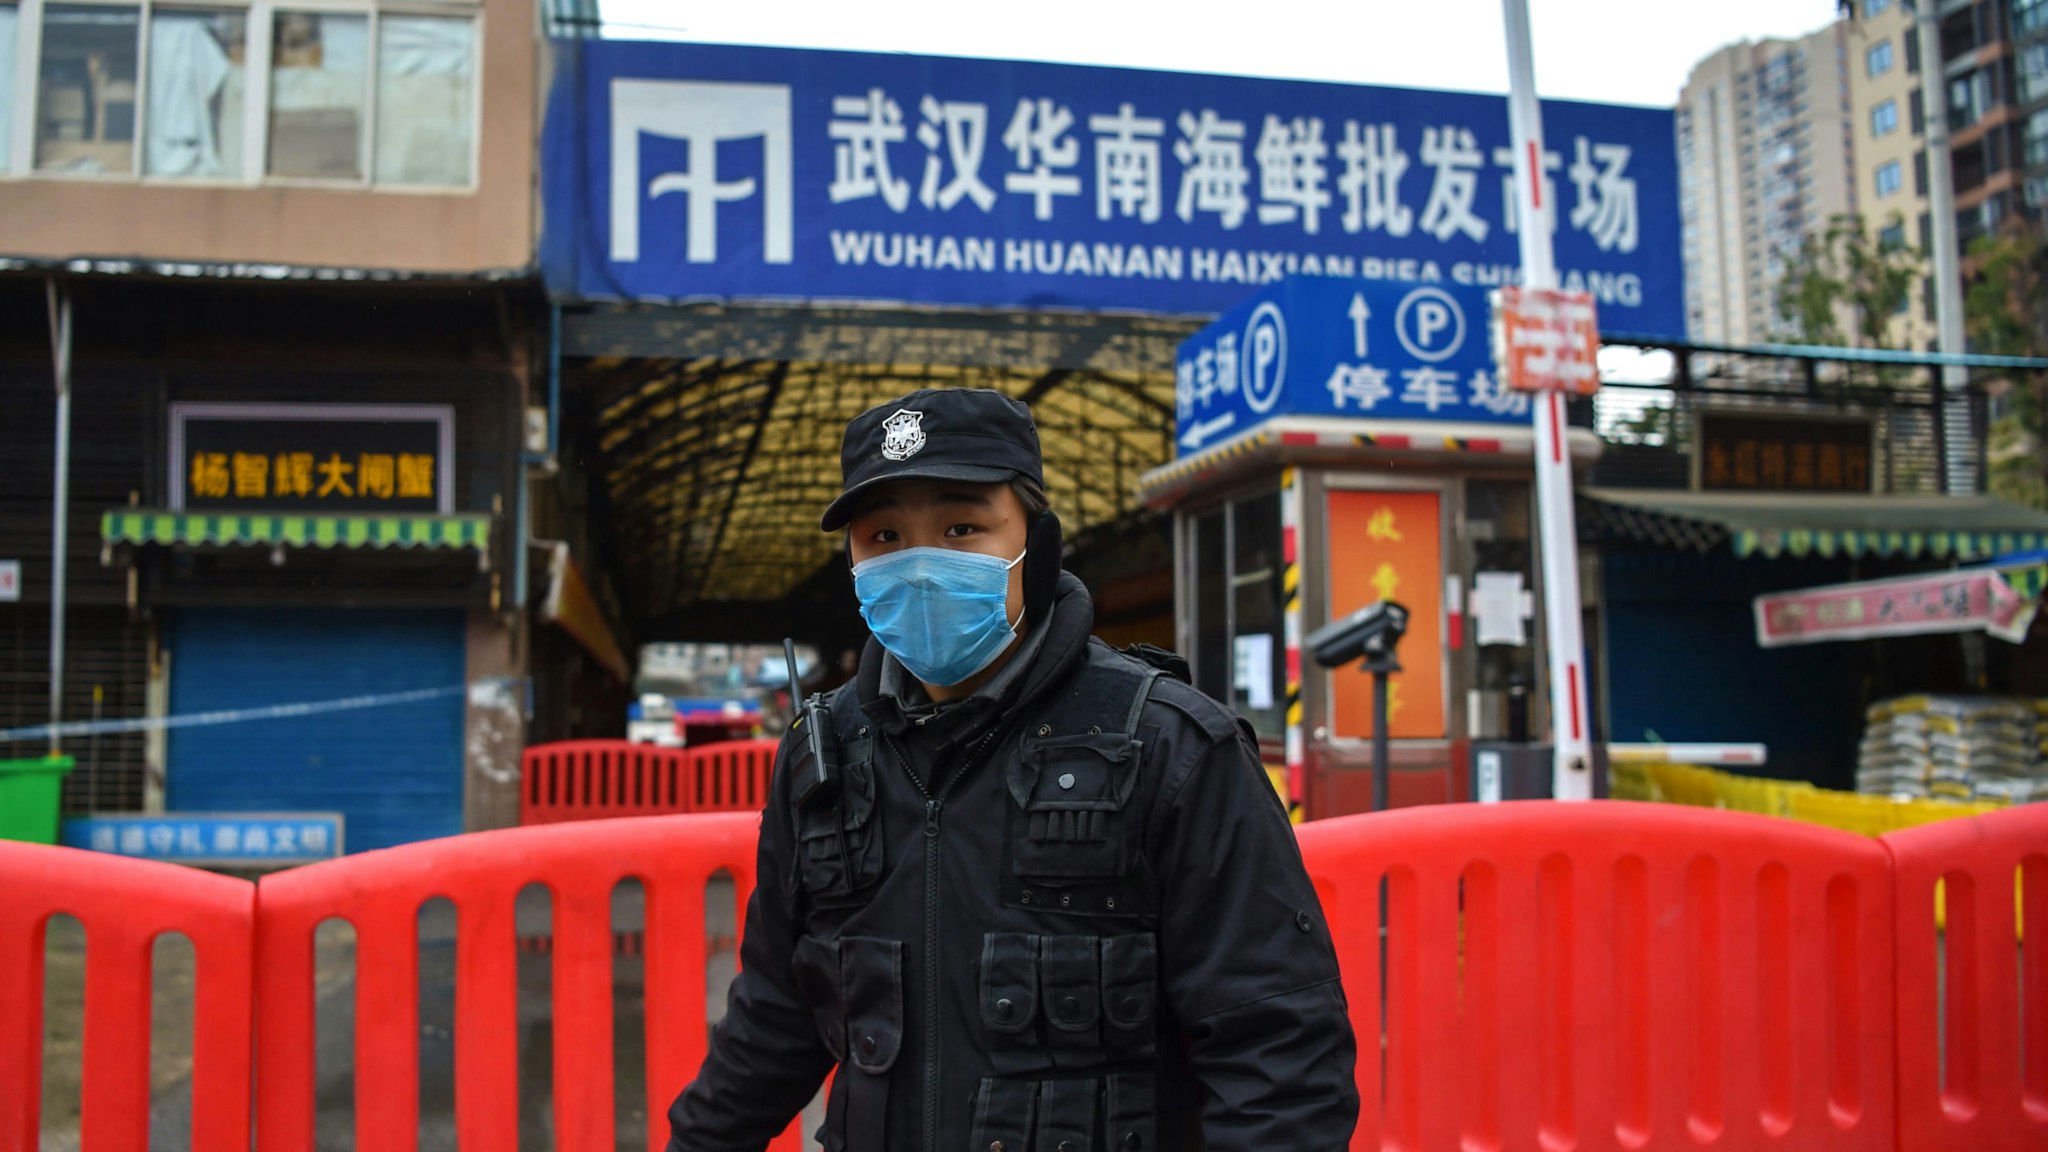 A police officer stands guard outside of Huanan Seafood Wholesale market where the coronavirus was detected in Wuhan on January 24, 2020. - The death toll in China's viral outbreak has risen to 25, with the number of confirmed cases also leaping to 830, the national health commission said.